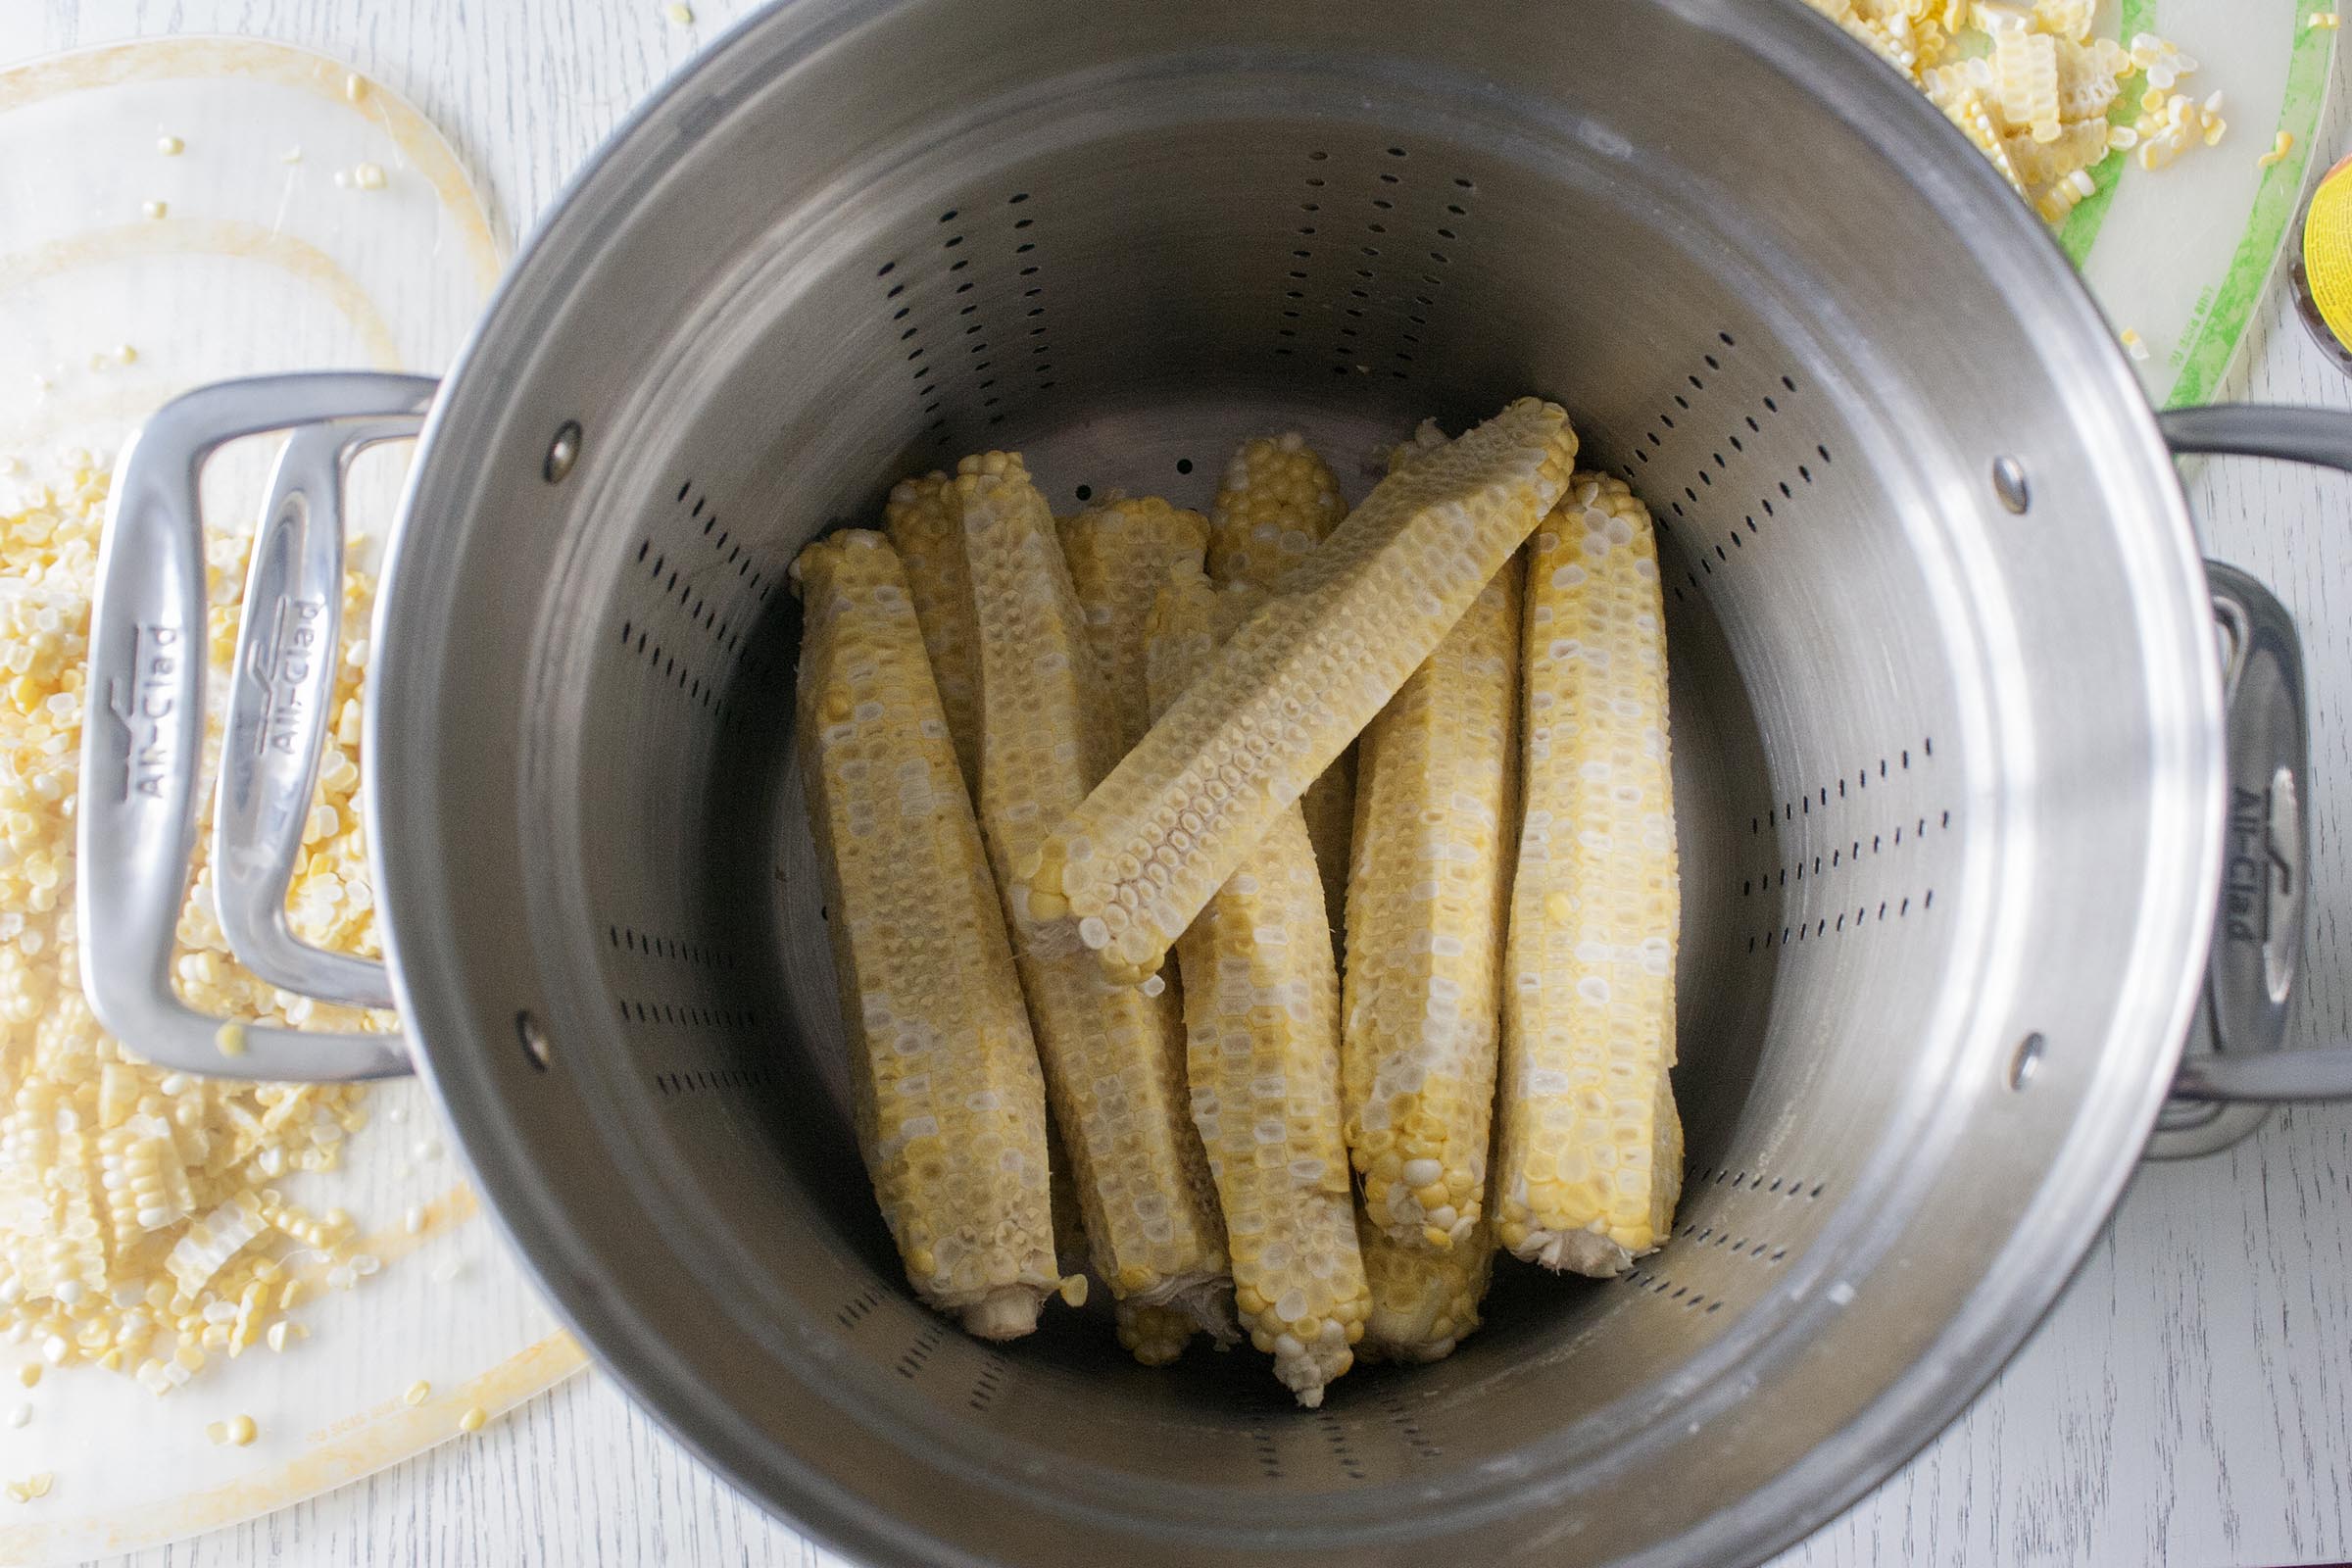 Stripped corn cobs heading into the pot. Add water, simmer and strain: corn stock! www.lifeaswecookit.com